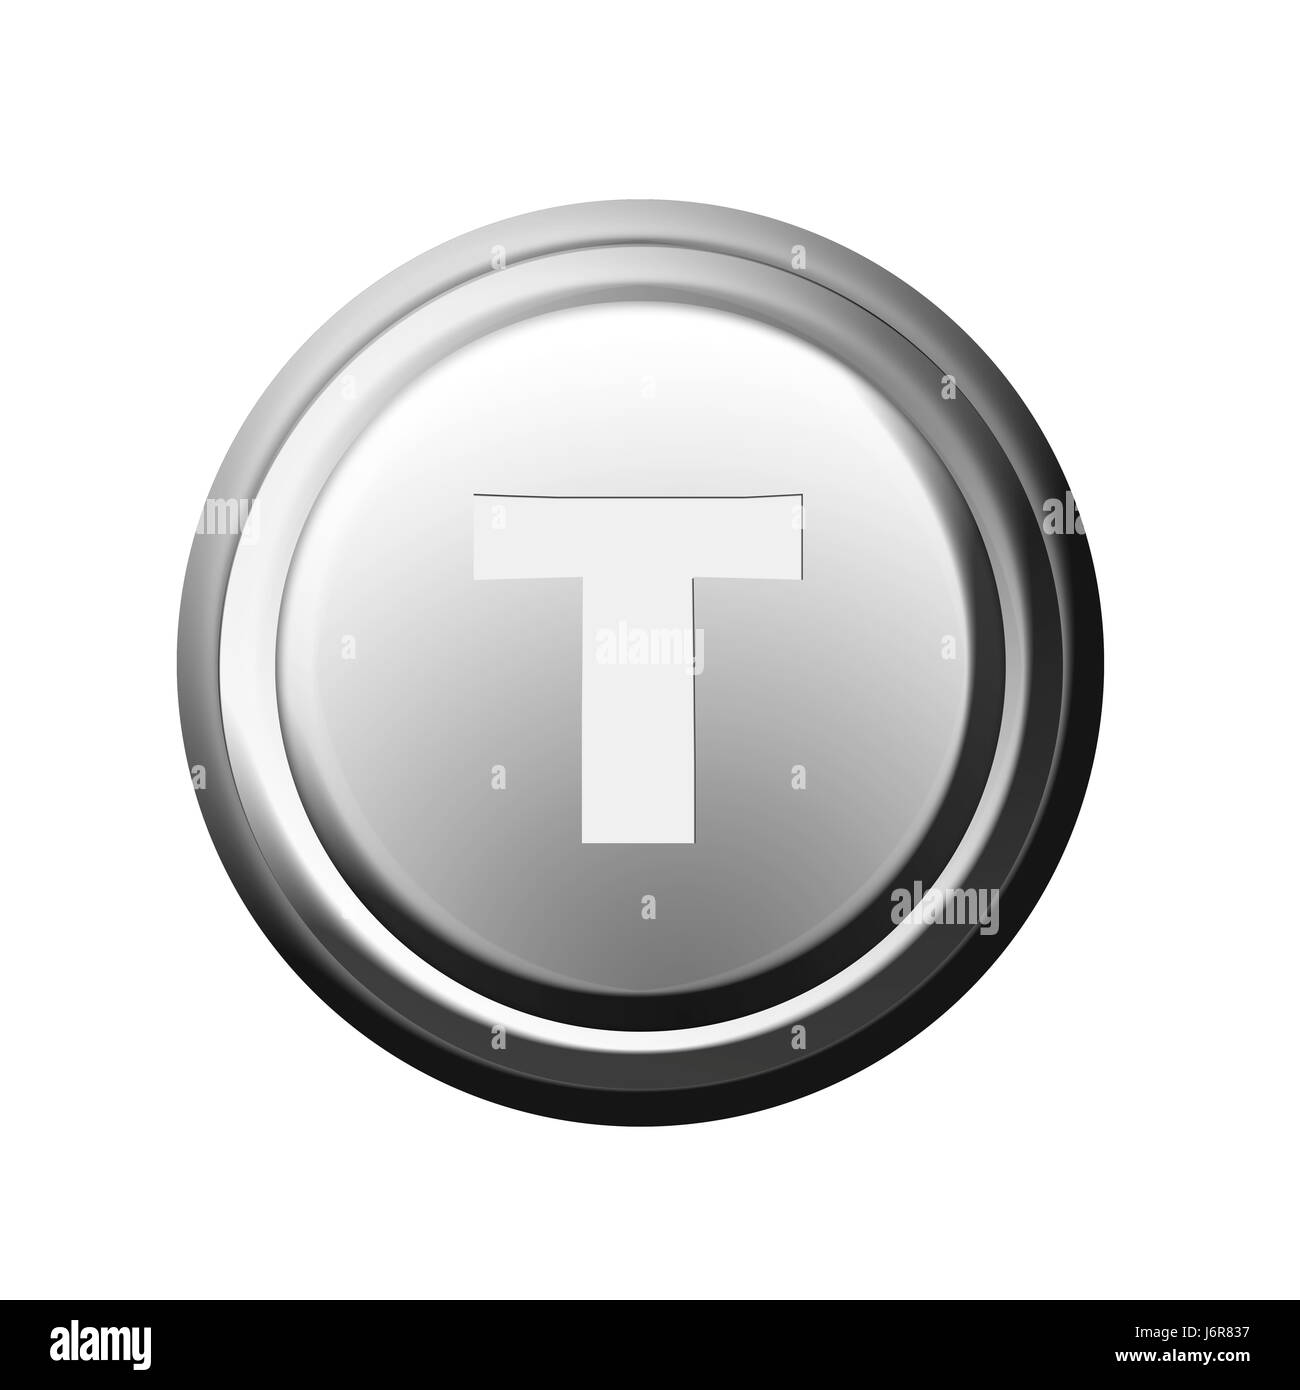 button with letter t Stock Photo